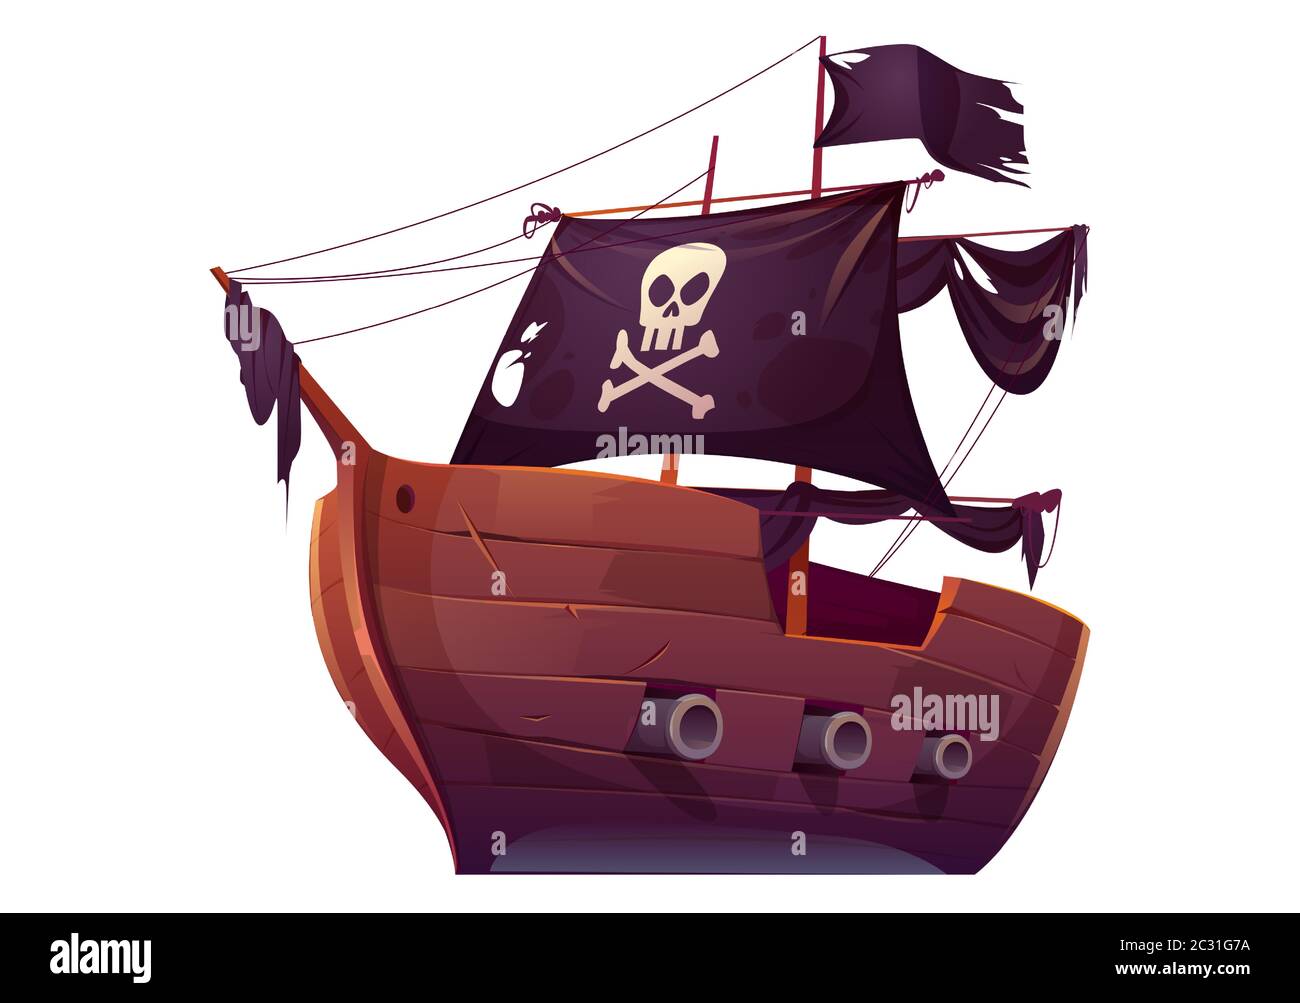 Vector wooden pirate boat with black sails. Corsair ship with black flag, cannons, skull and crossbones on canvas. Cartoon old wooden ship, vintage ga Stock Vector